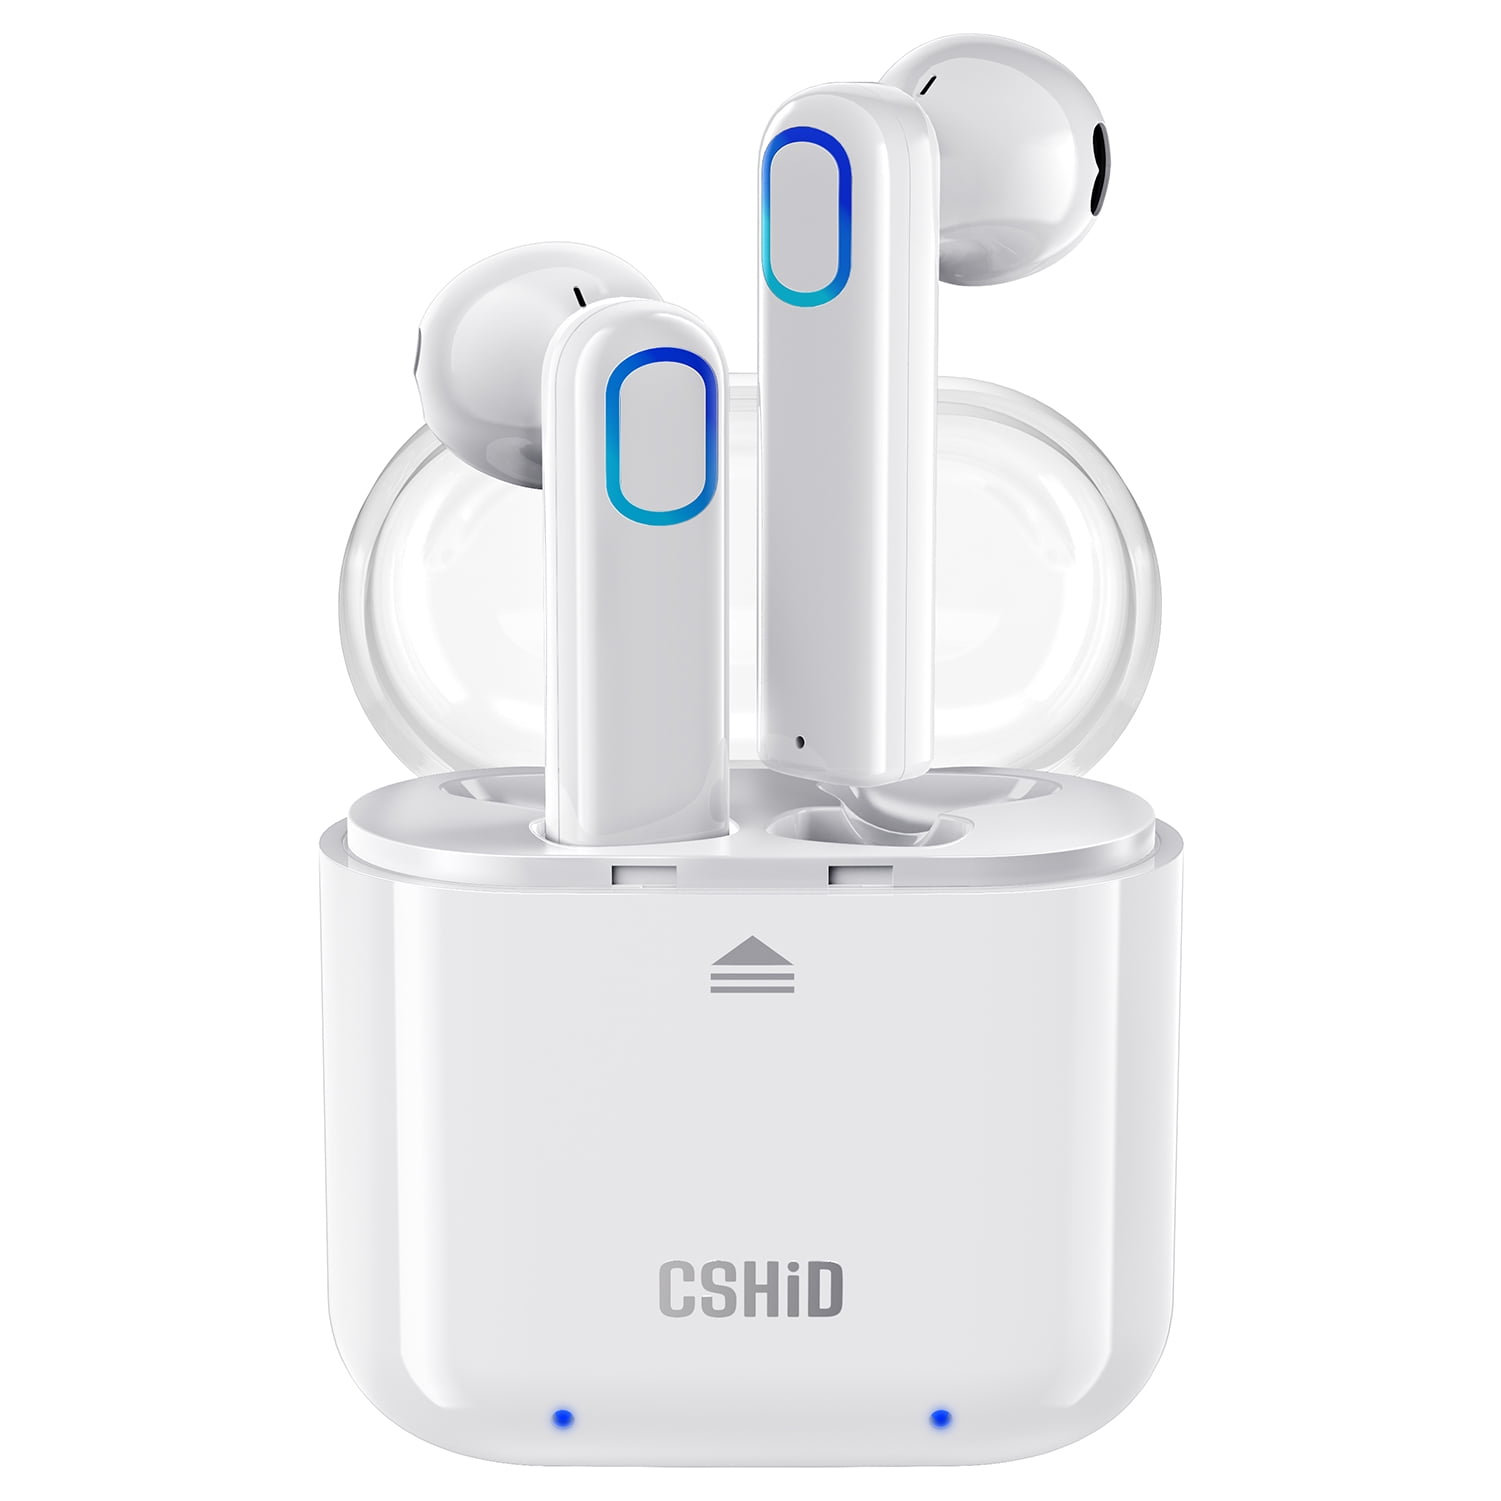 in-Ear Headphones Noise Cancelling Headphones 3D Stereo Bluetooth Headset Auto-Paired Convenient Call Built-in Microphone Compatible with All Smartphones